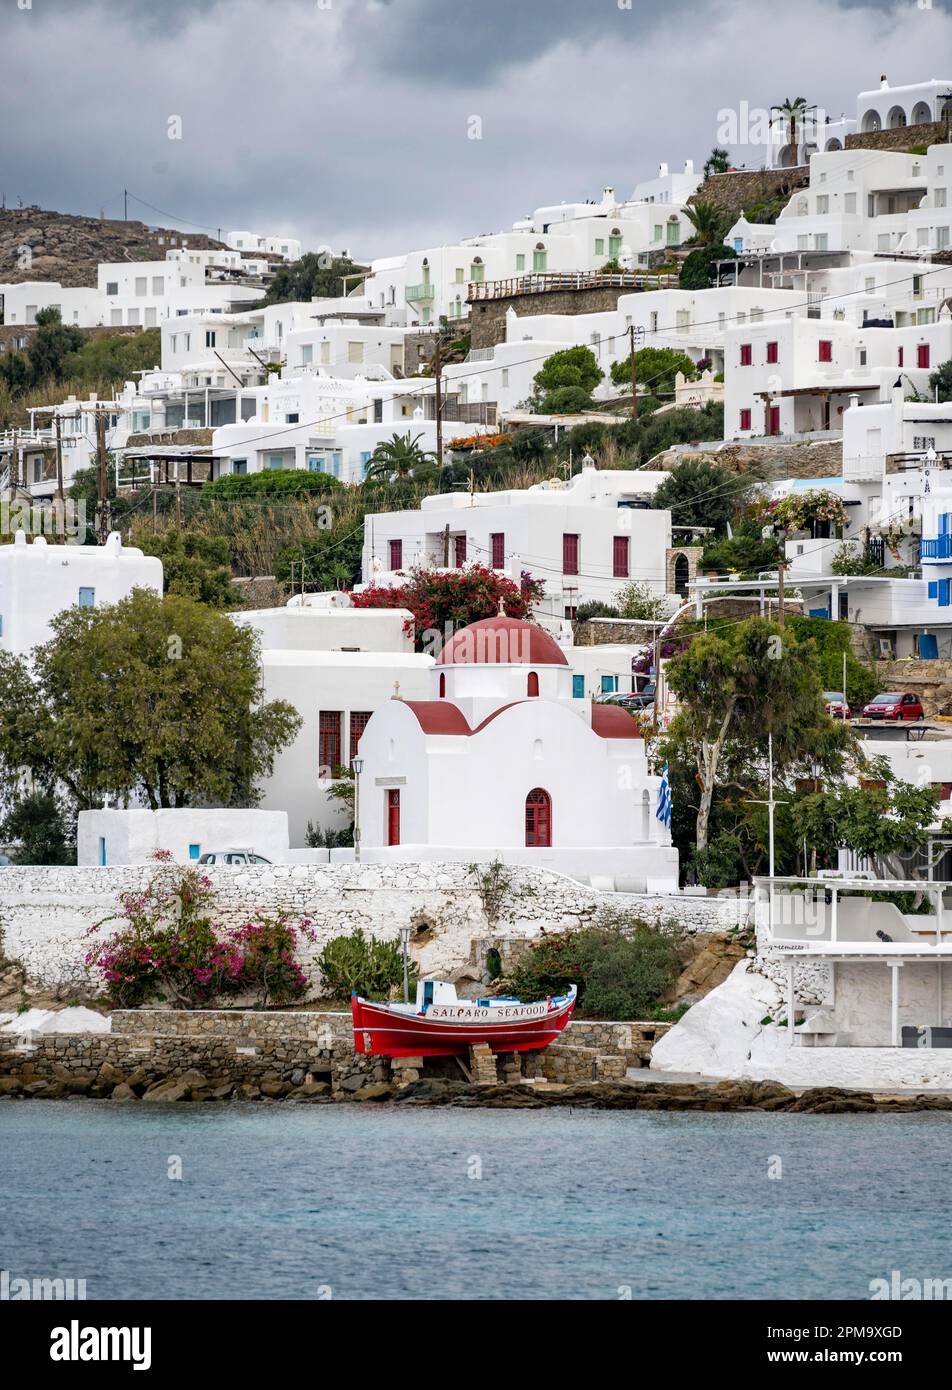 Fishing boat and small Greek Orthodox white church with red roof, Holy Church of Rodon and Amaranto, Old Port of Mykonos, Chora, Mykonos Town Stock Photo